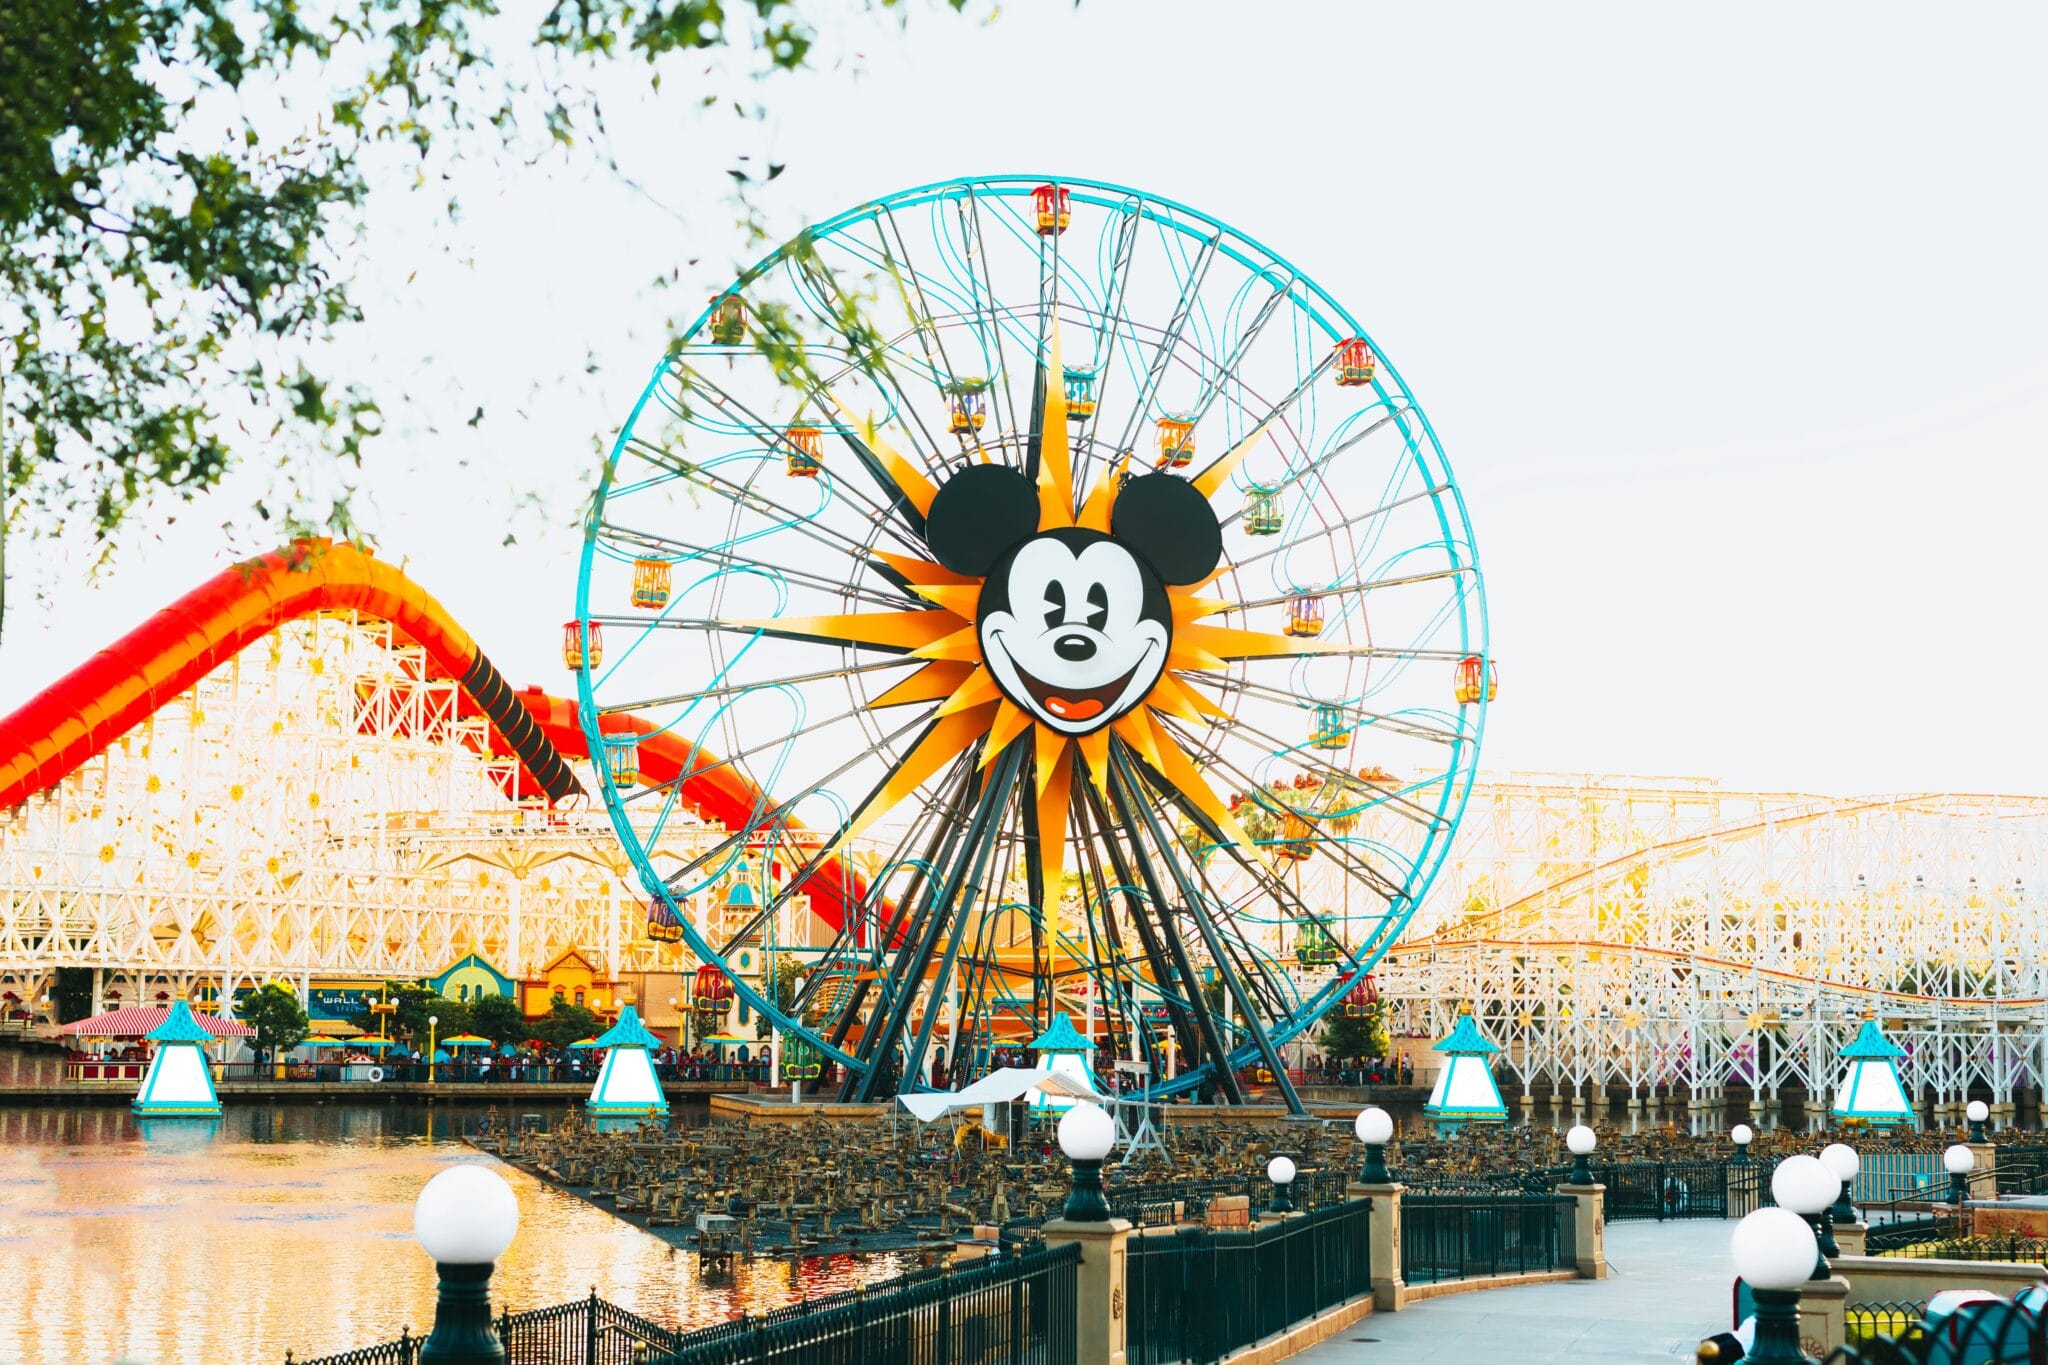 An Instagrammer's Guide to Disneyland